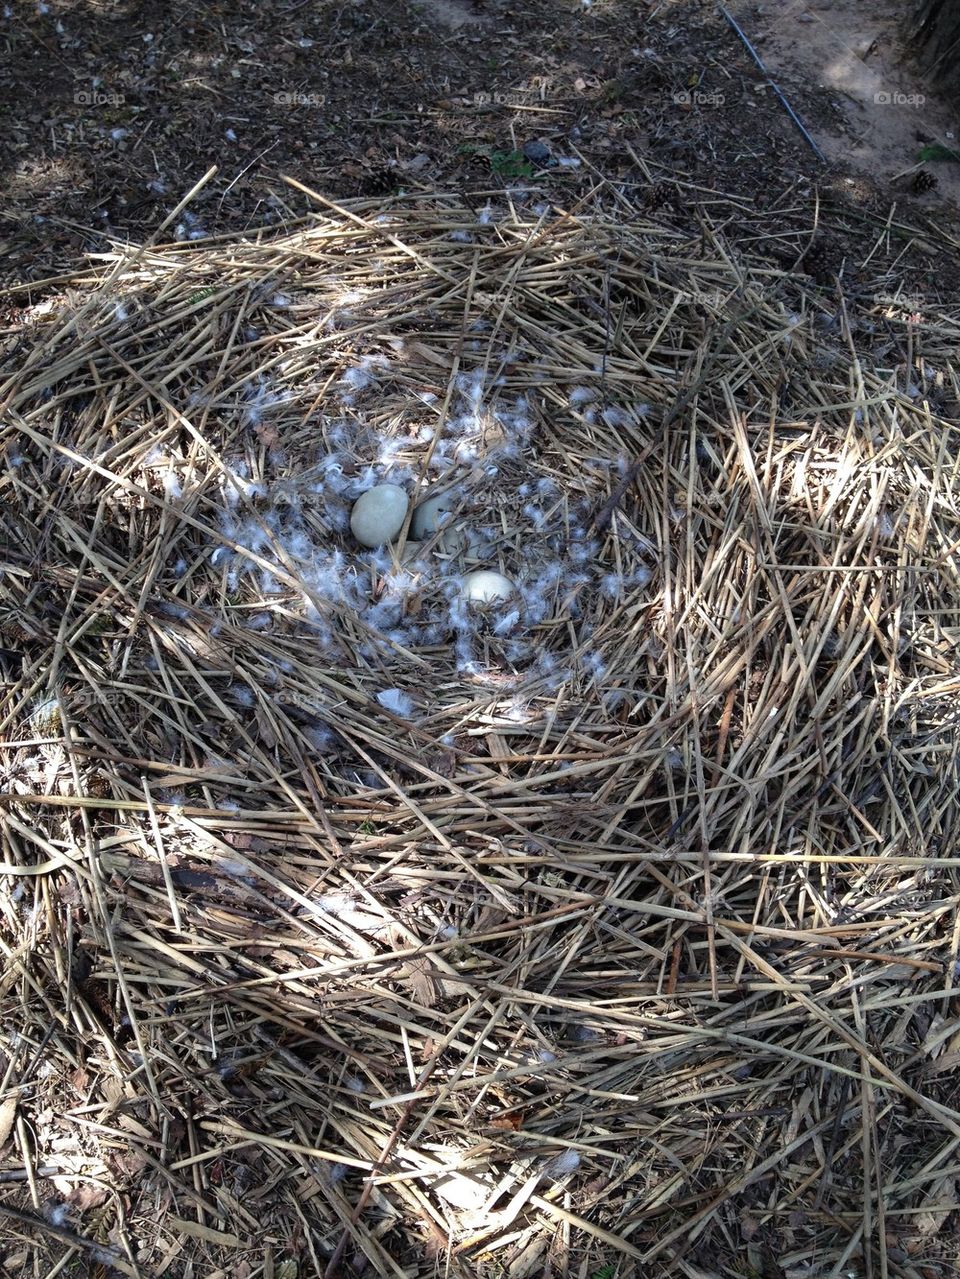 Swan eggs in a nest